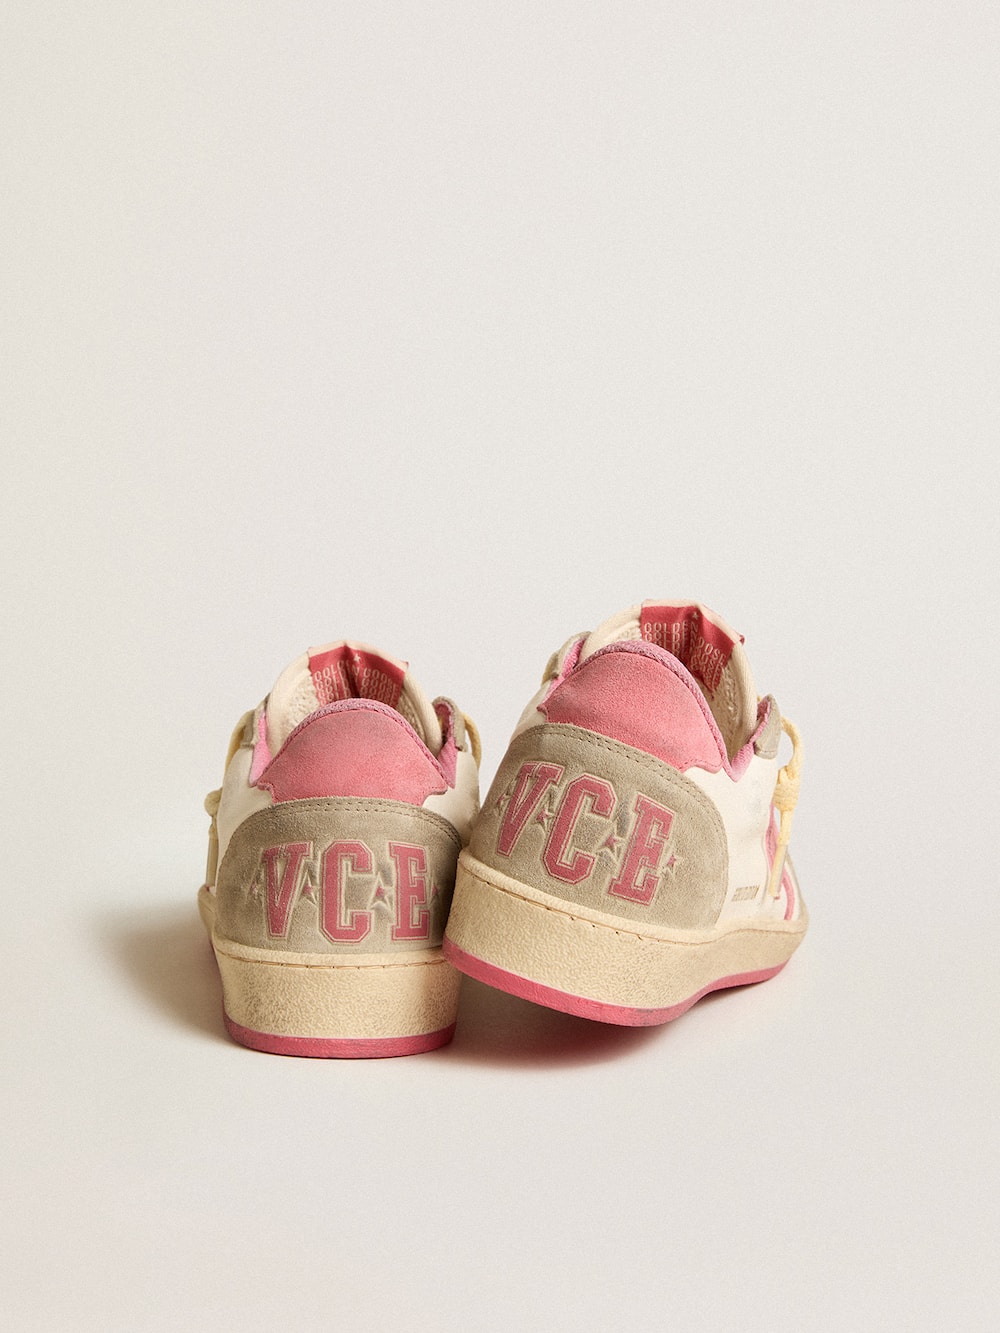 Golden Goose - Women's Ball Star LTD in nappa with pink suede star and dove-gray inserts in 